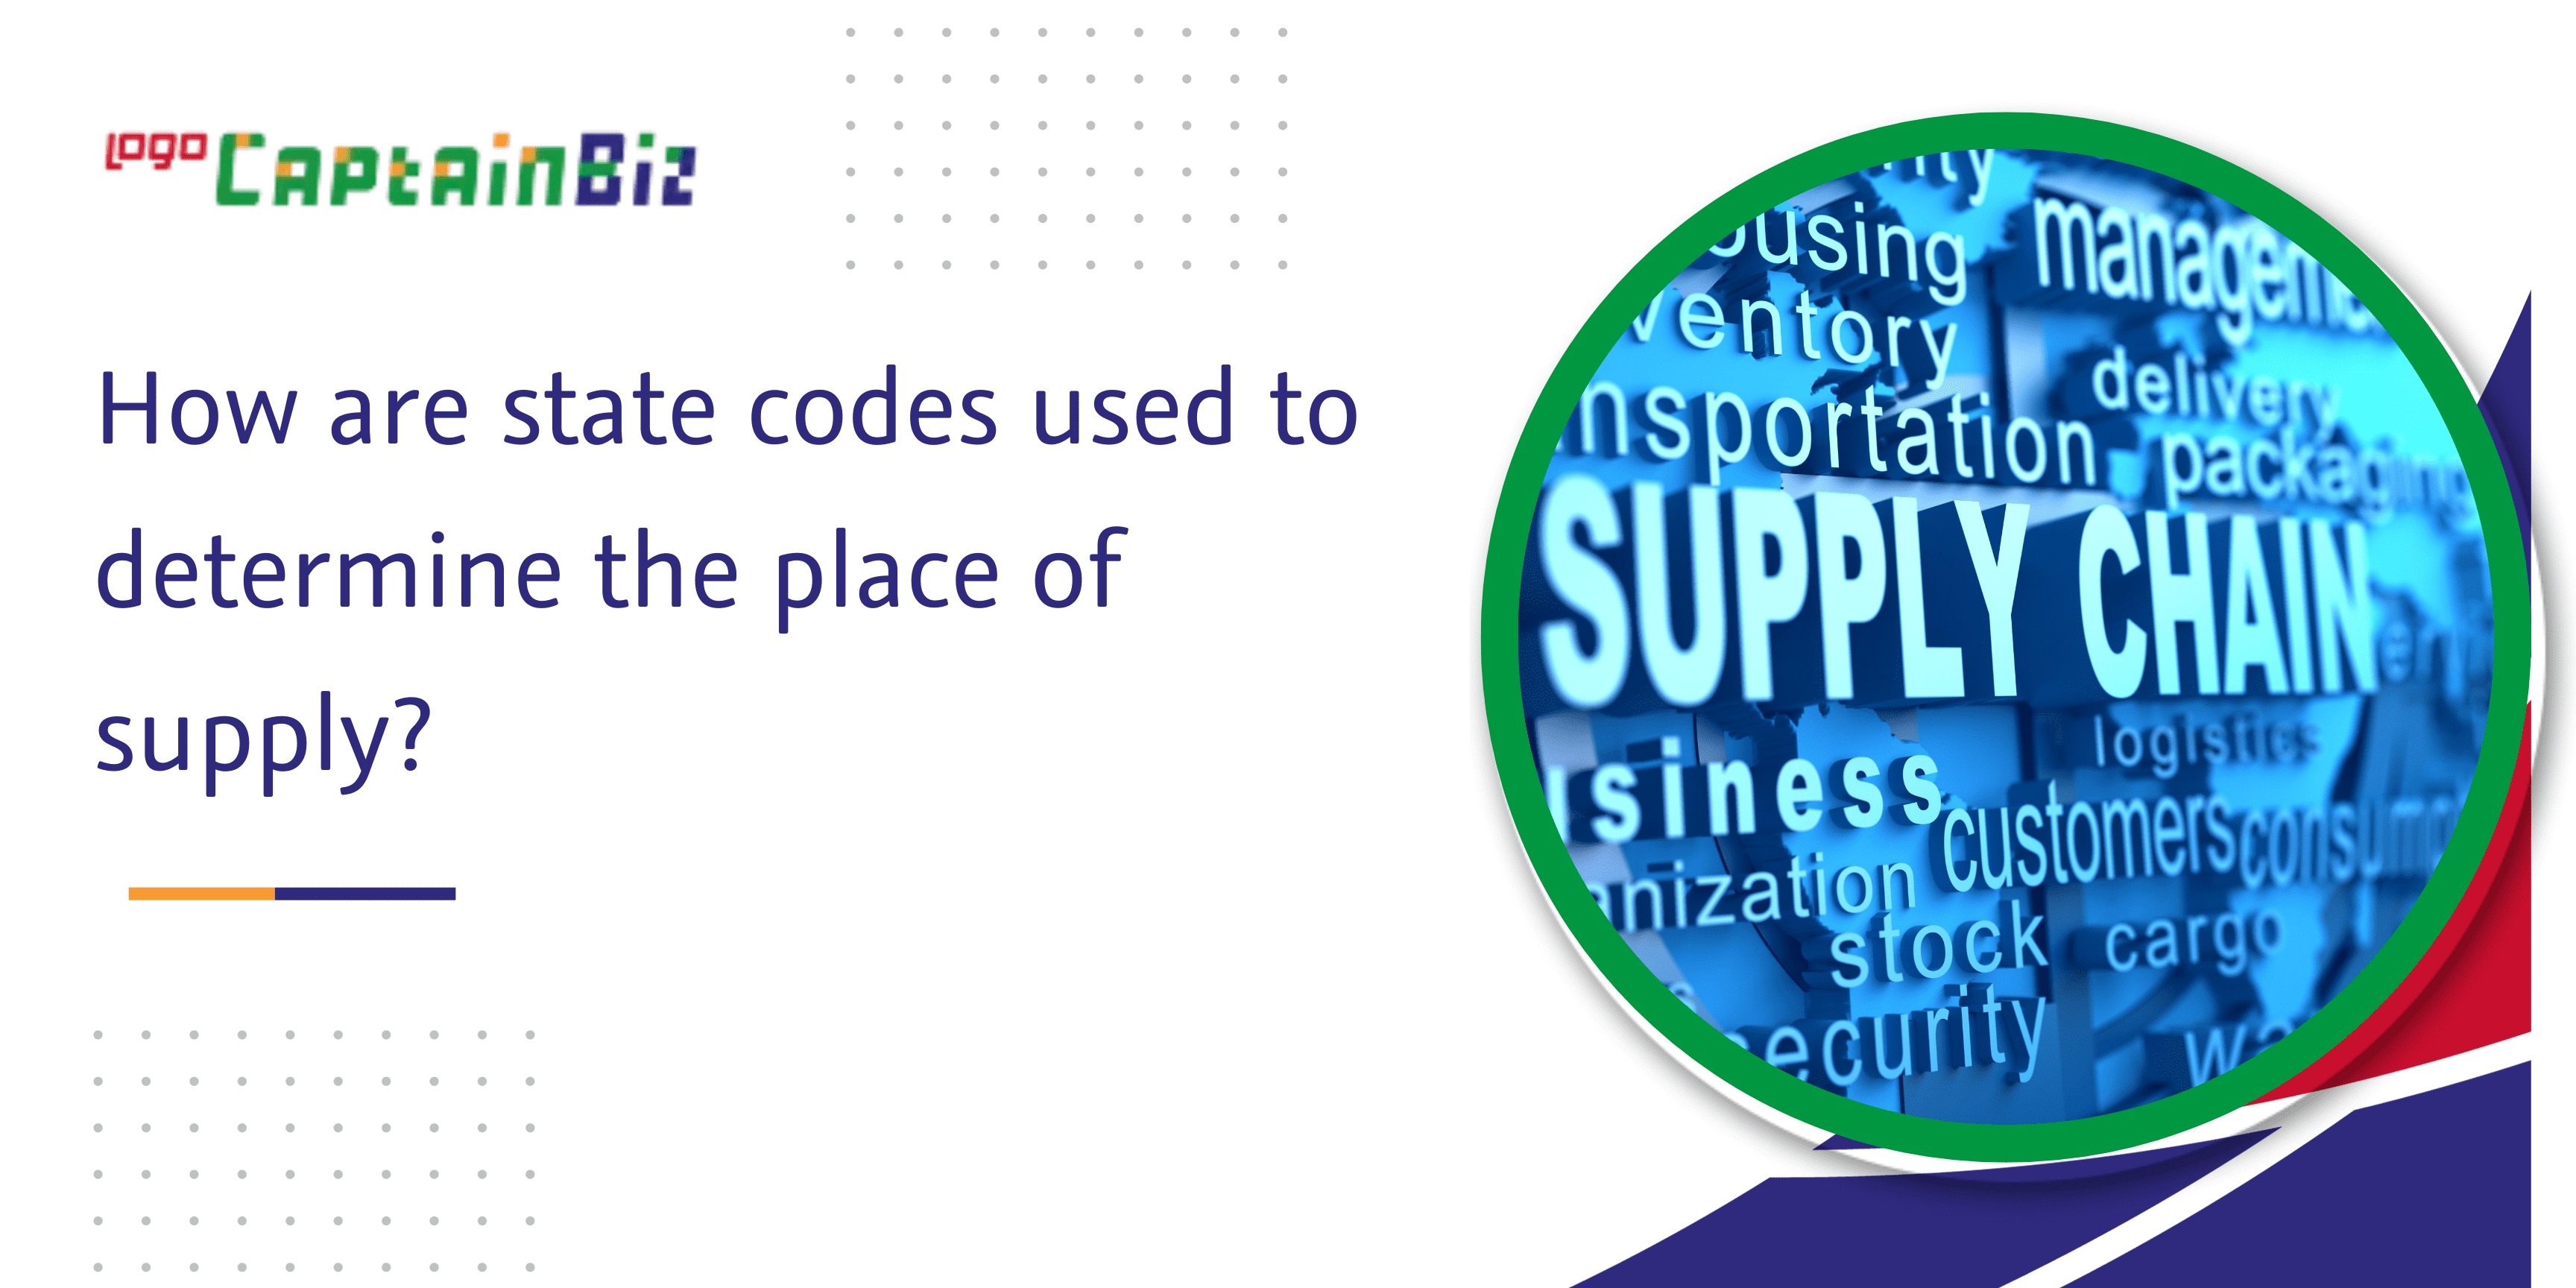 How are state codes used to determine the place of supply?